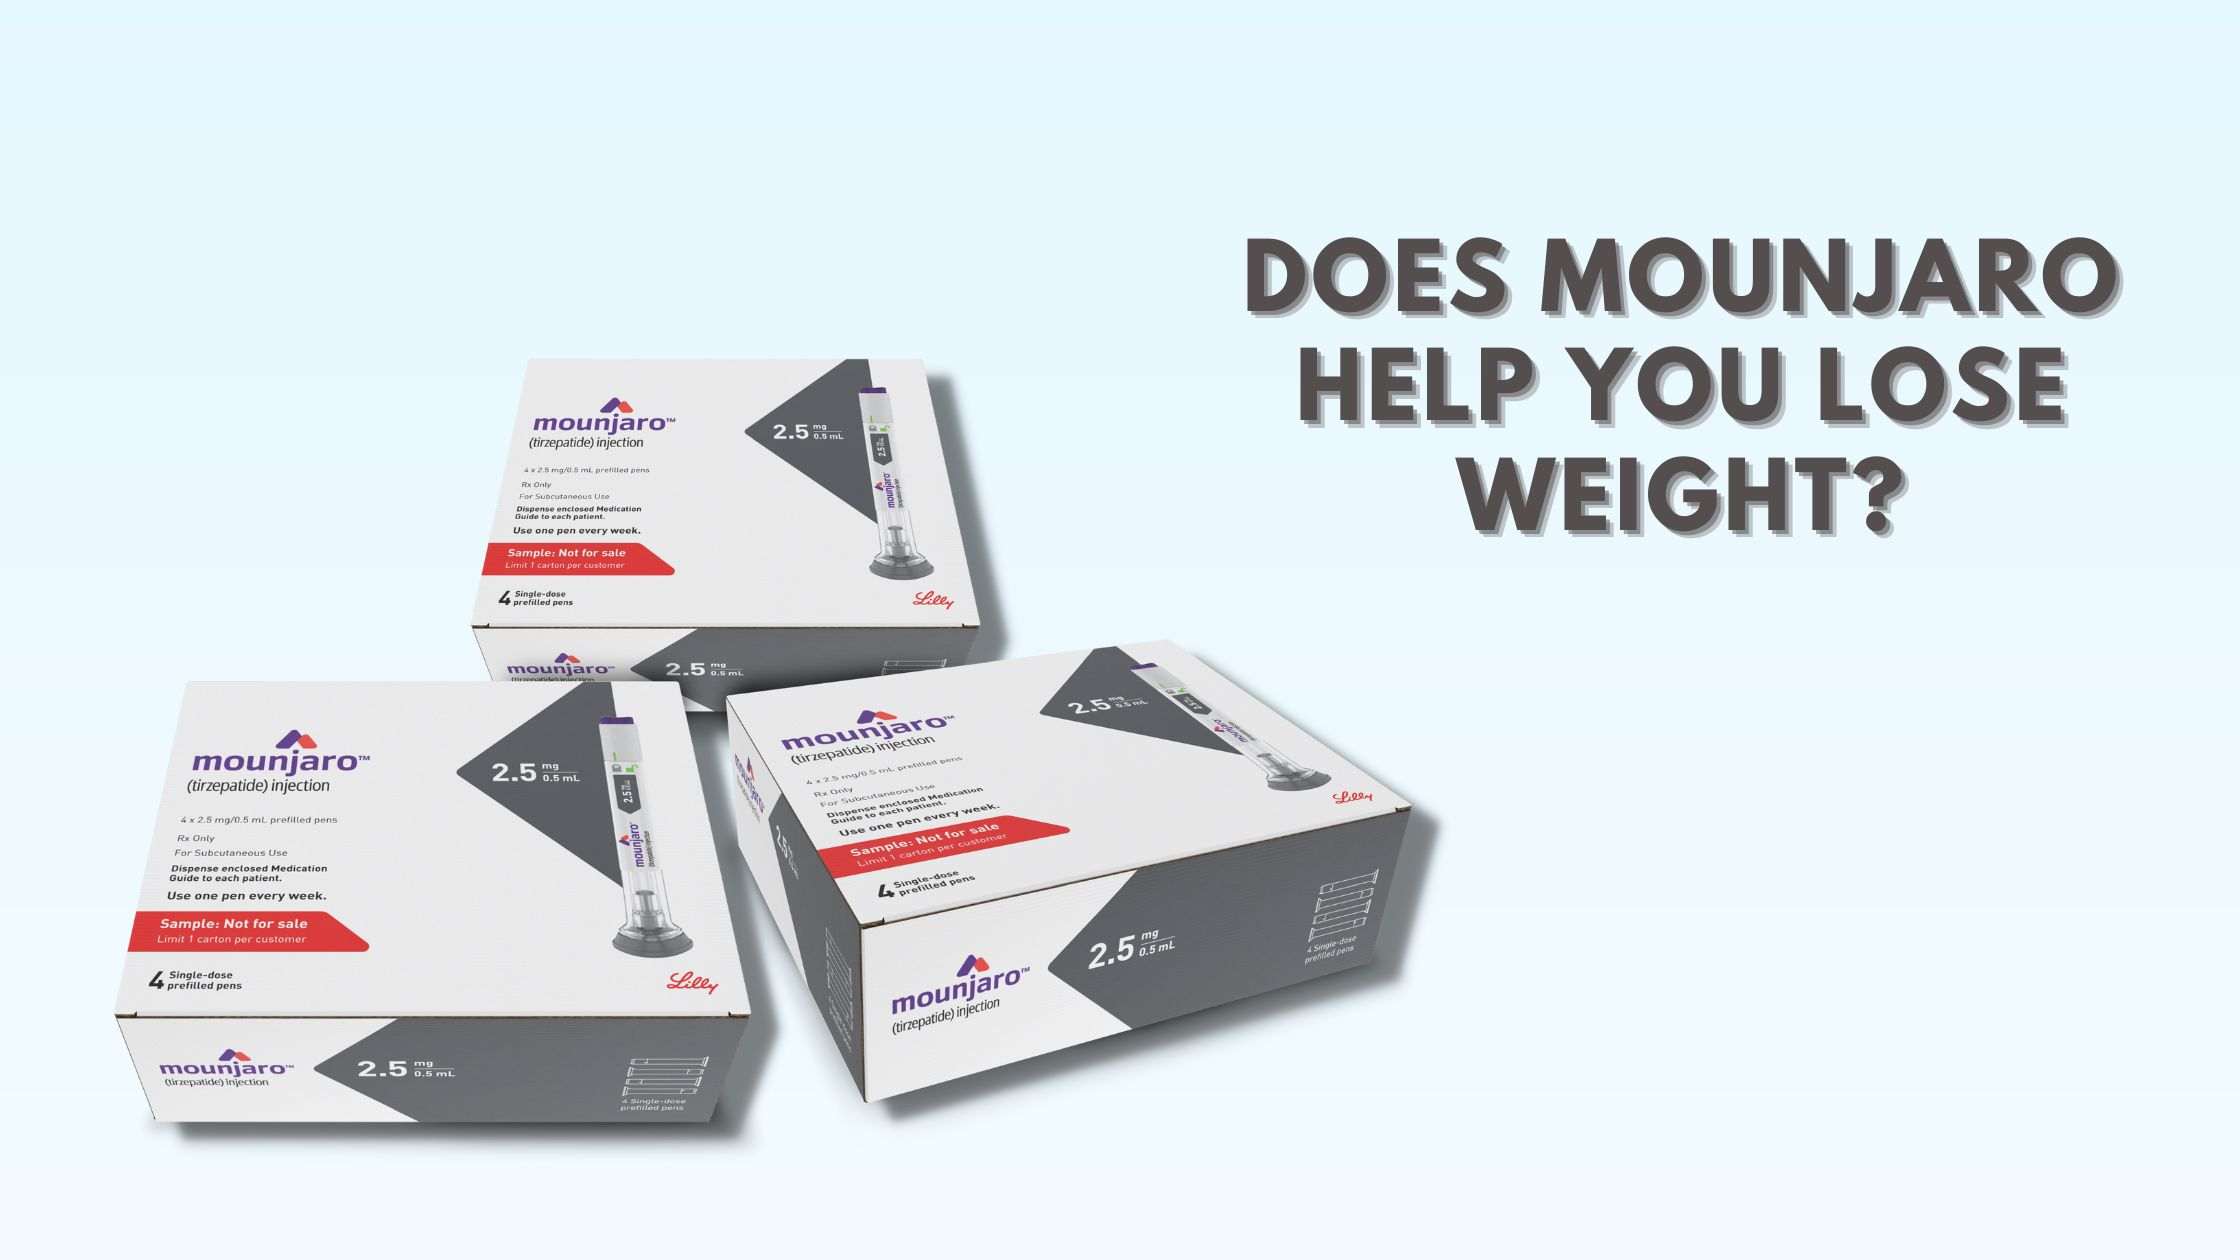 Mounjaro Weight Loss How Quickly Does It Work For Weight Loss?